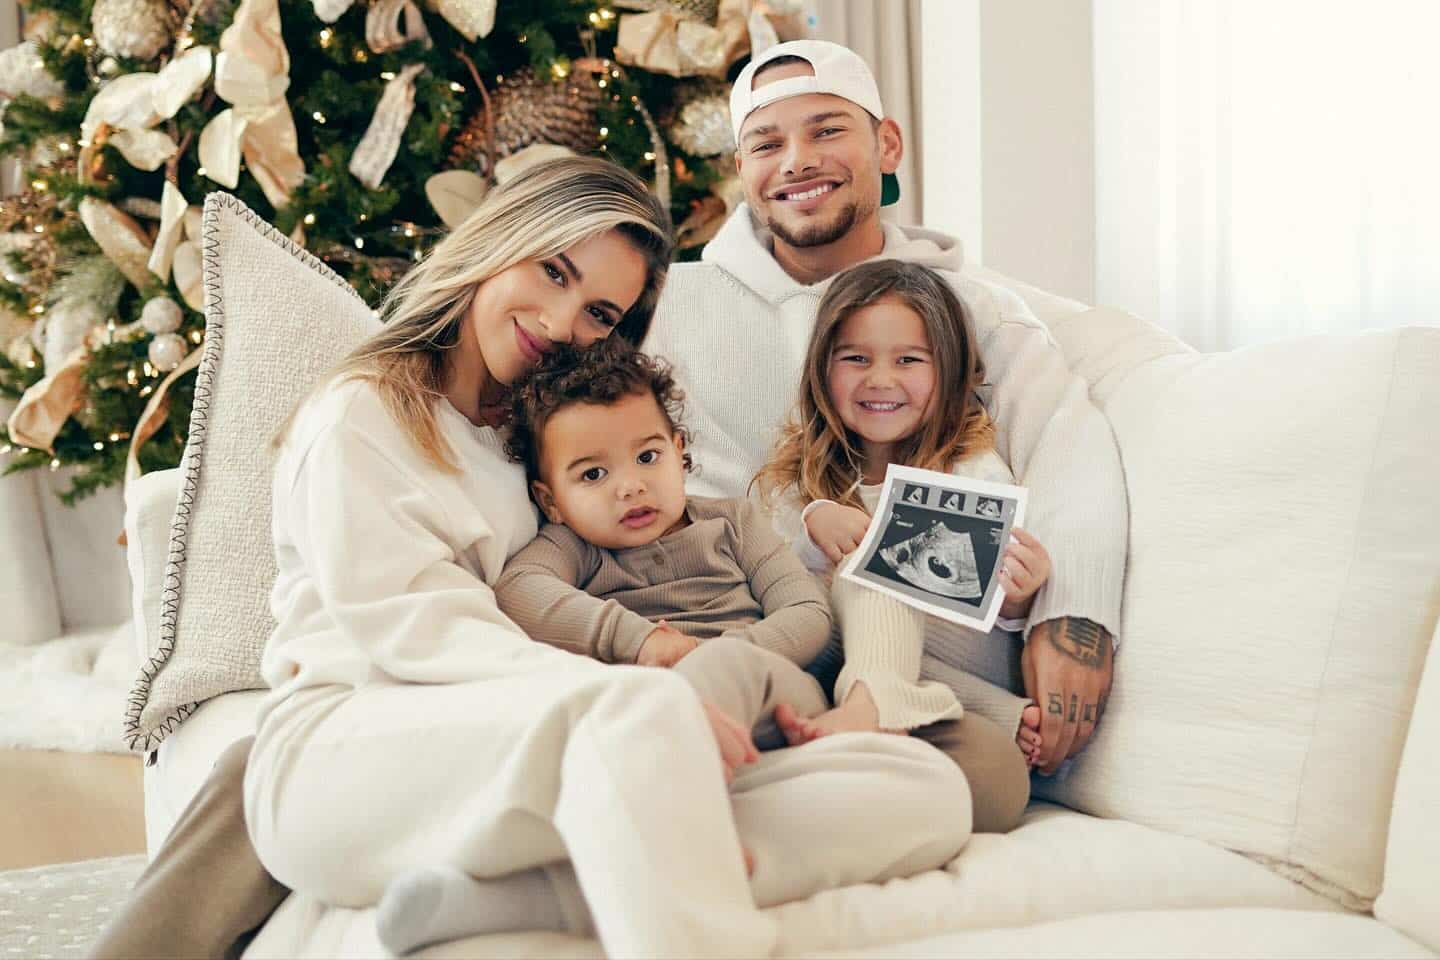 Kane and Katelyn Brown pose with their daughter, Kingsley, daughter Kodi, and a sonogram photo to announce they're expecting their third child.